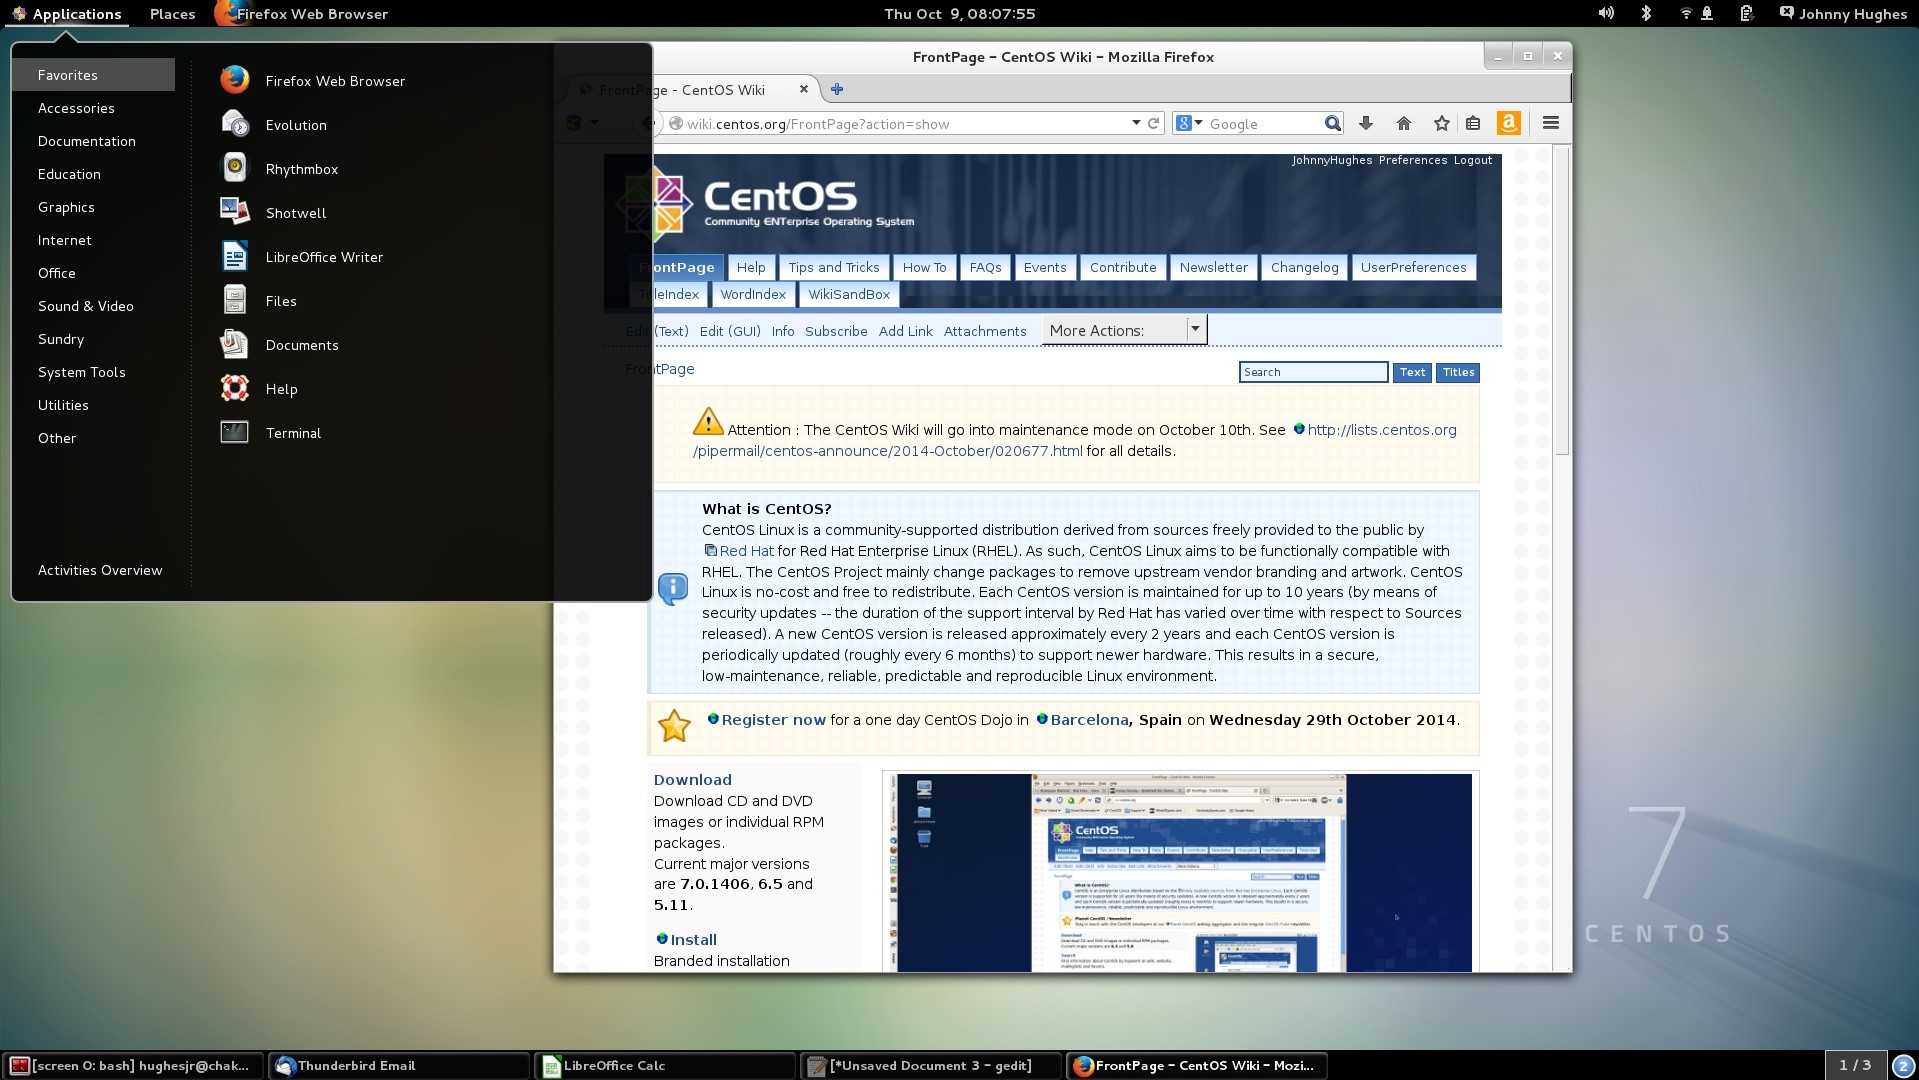 How to install google chrome on centos, red hat or fedora